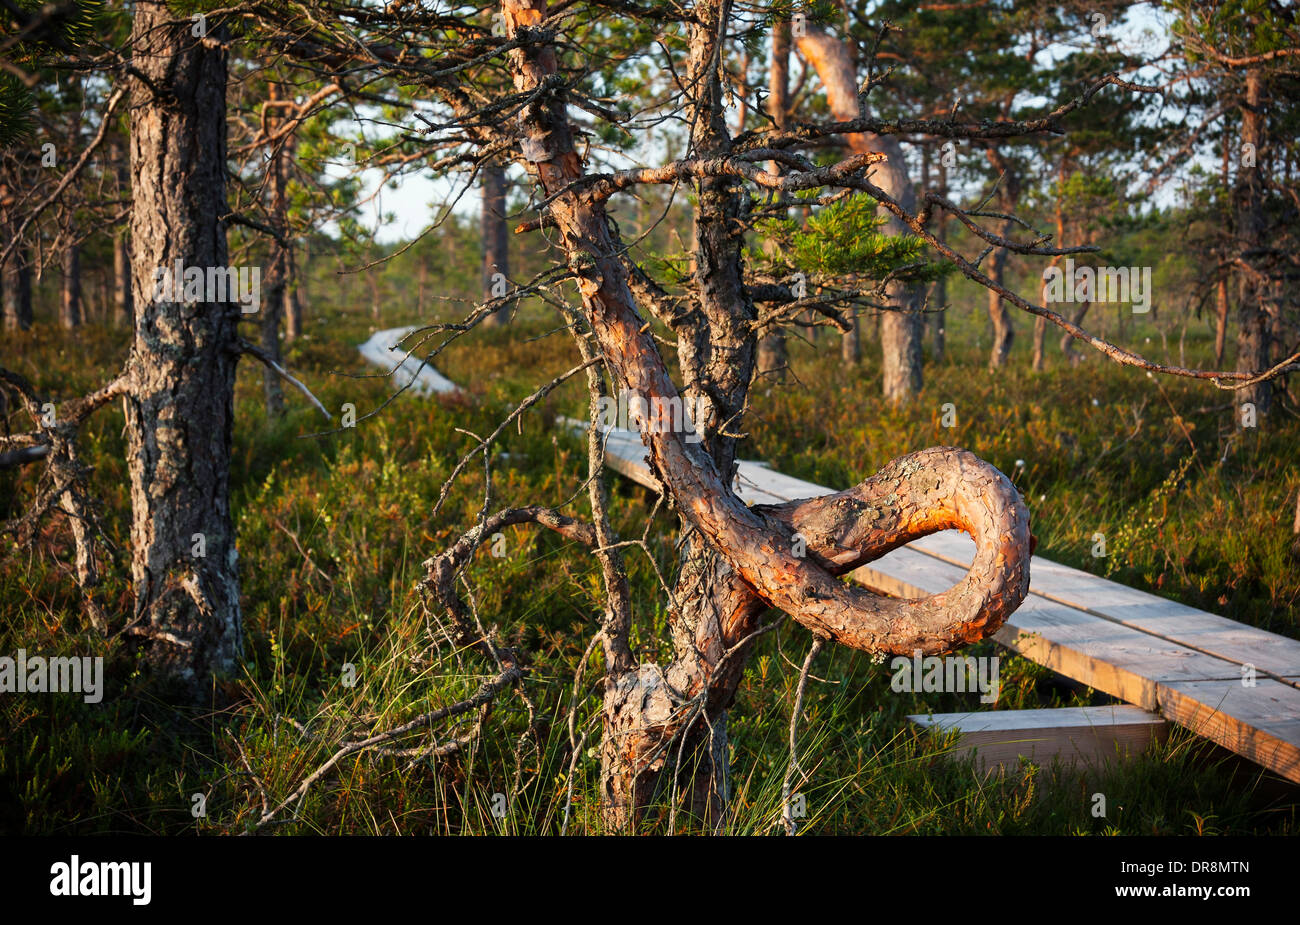 Twirly or twisted pine tree in front of boardwalk in marsh Stock Photo